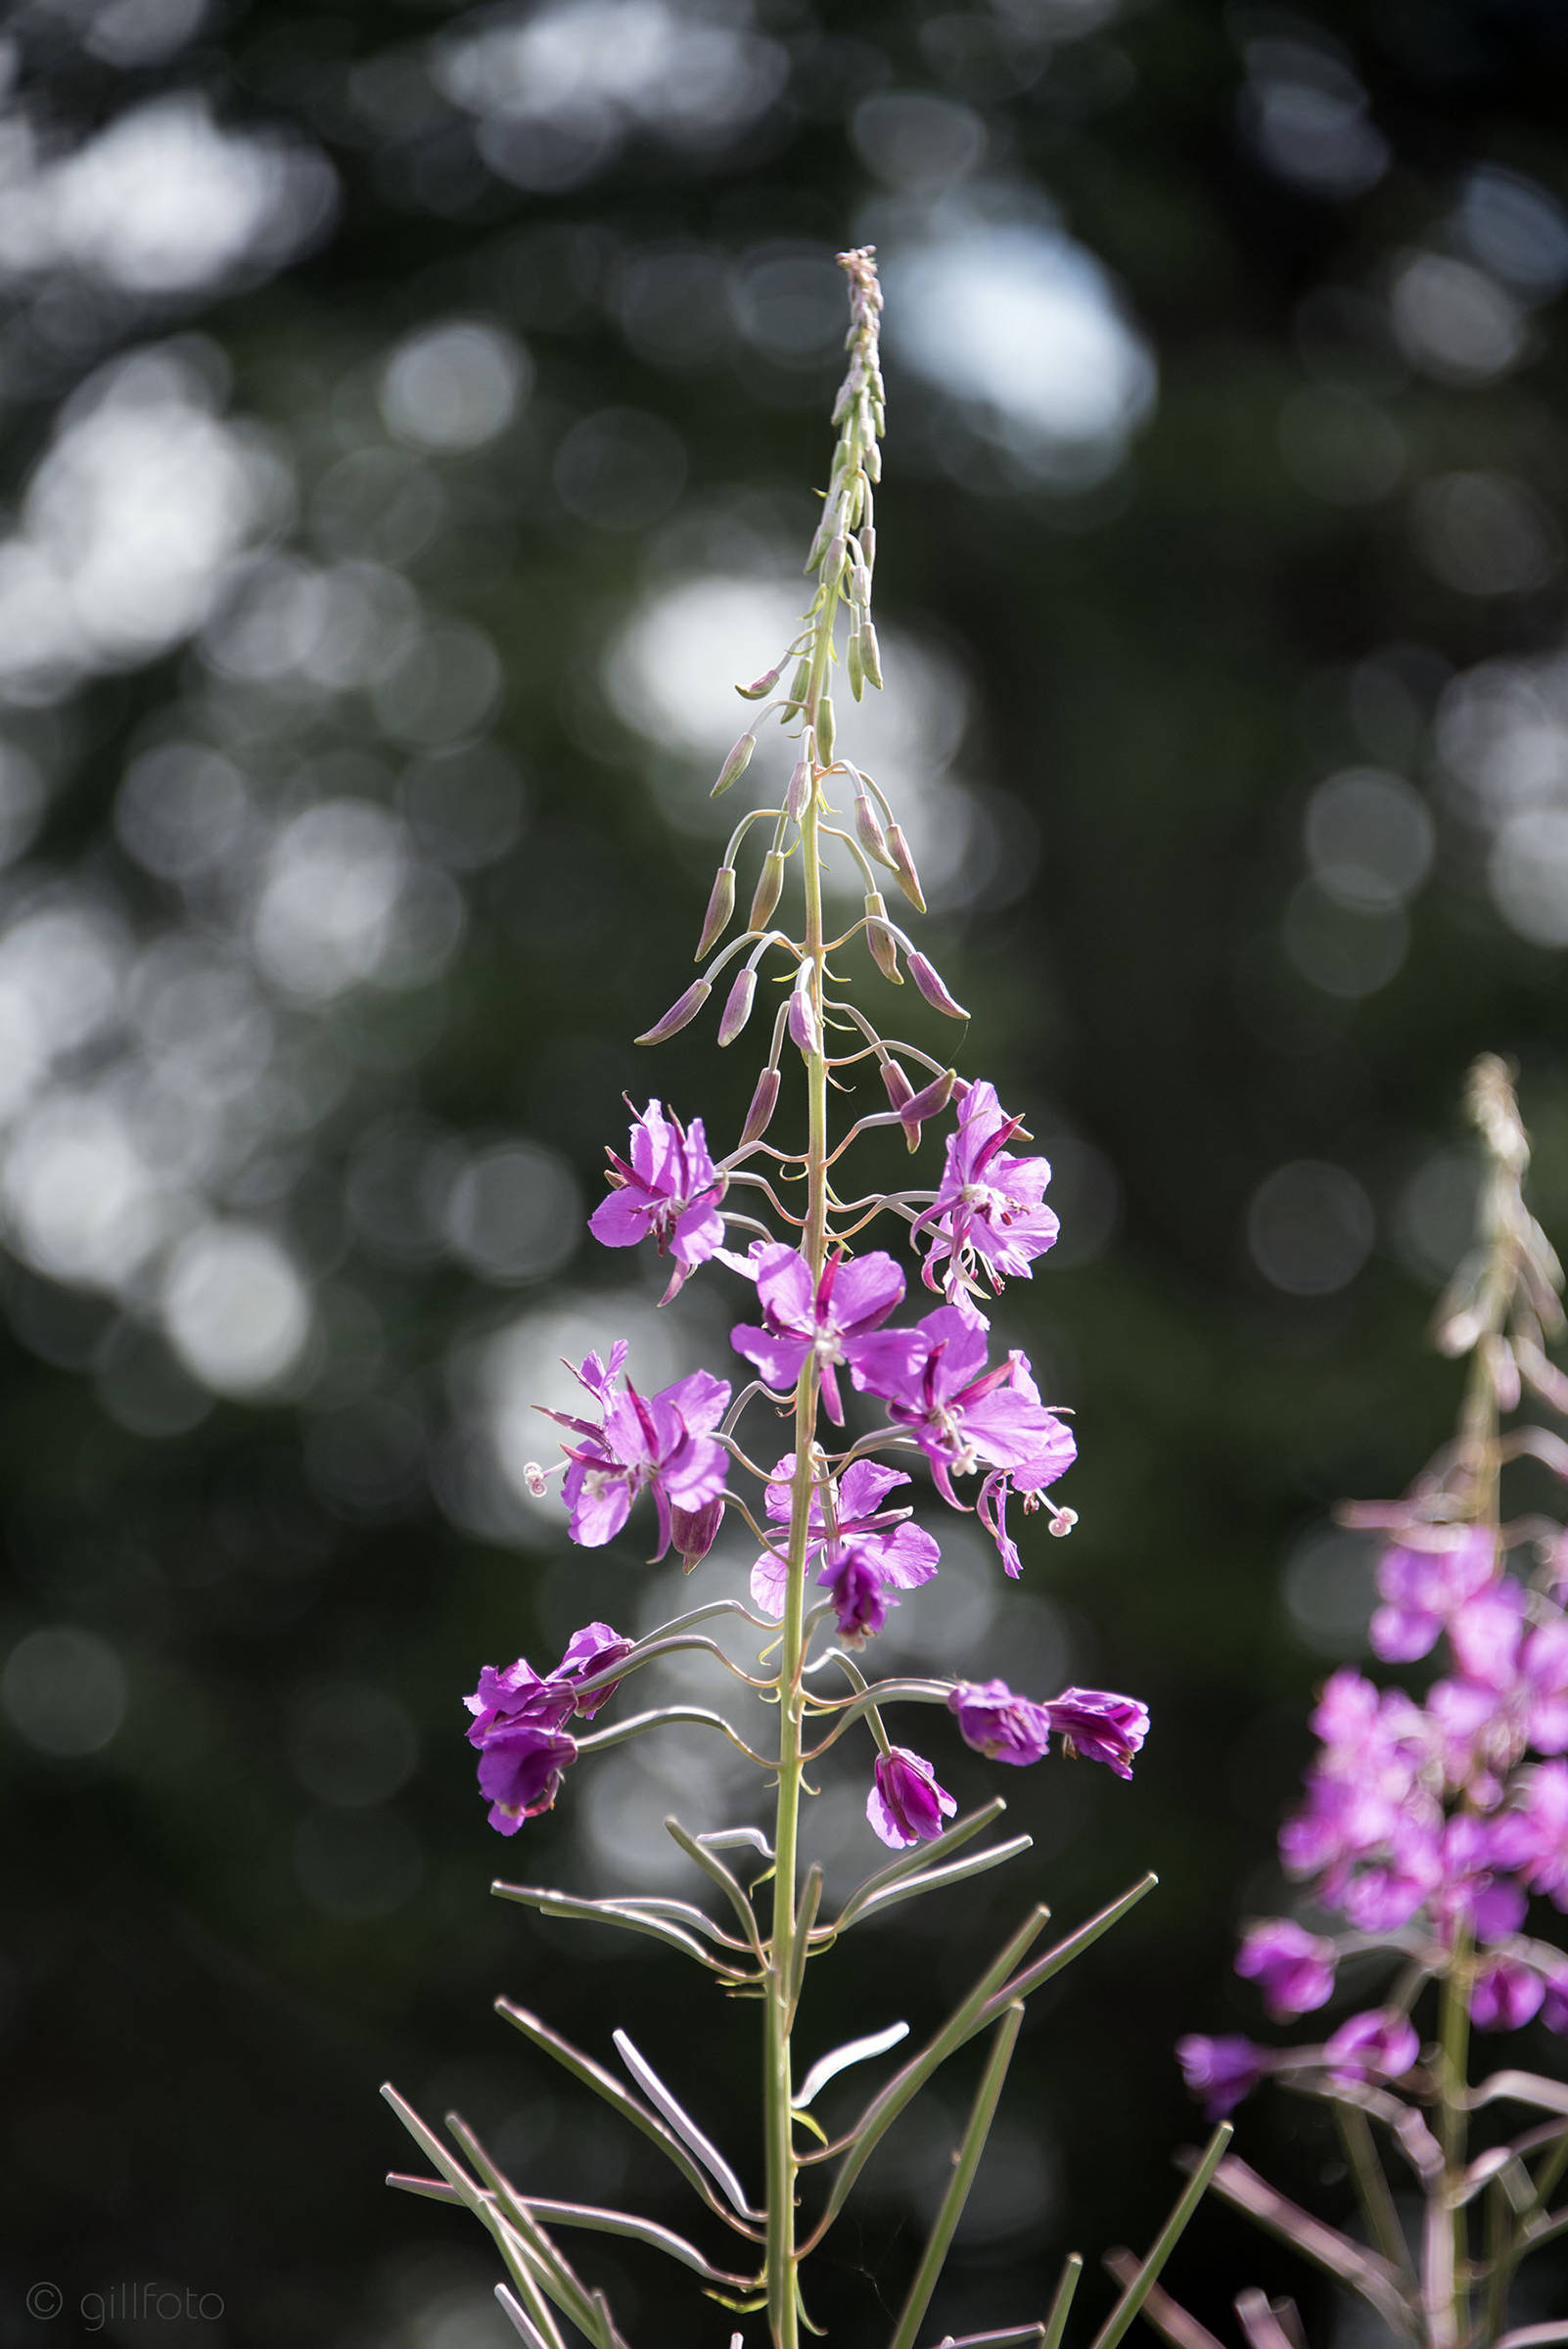 A solo fireweed plant in Cowee Meadow in Point Bridget State Park on Sunday, July 21, 2019. (Courtesy Photo | Kenneth Gill)